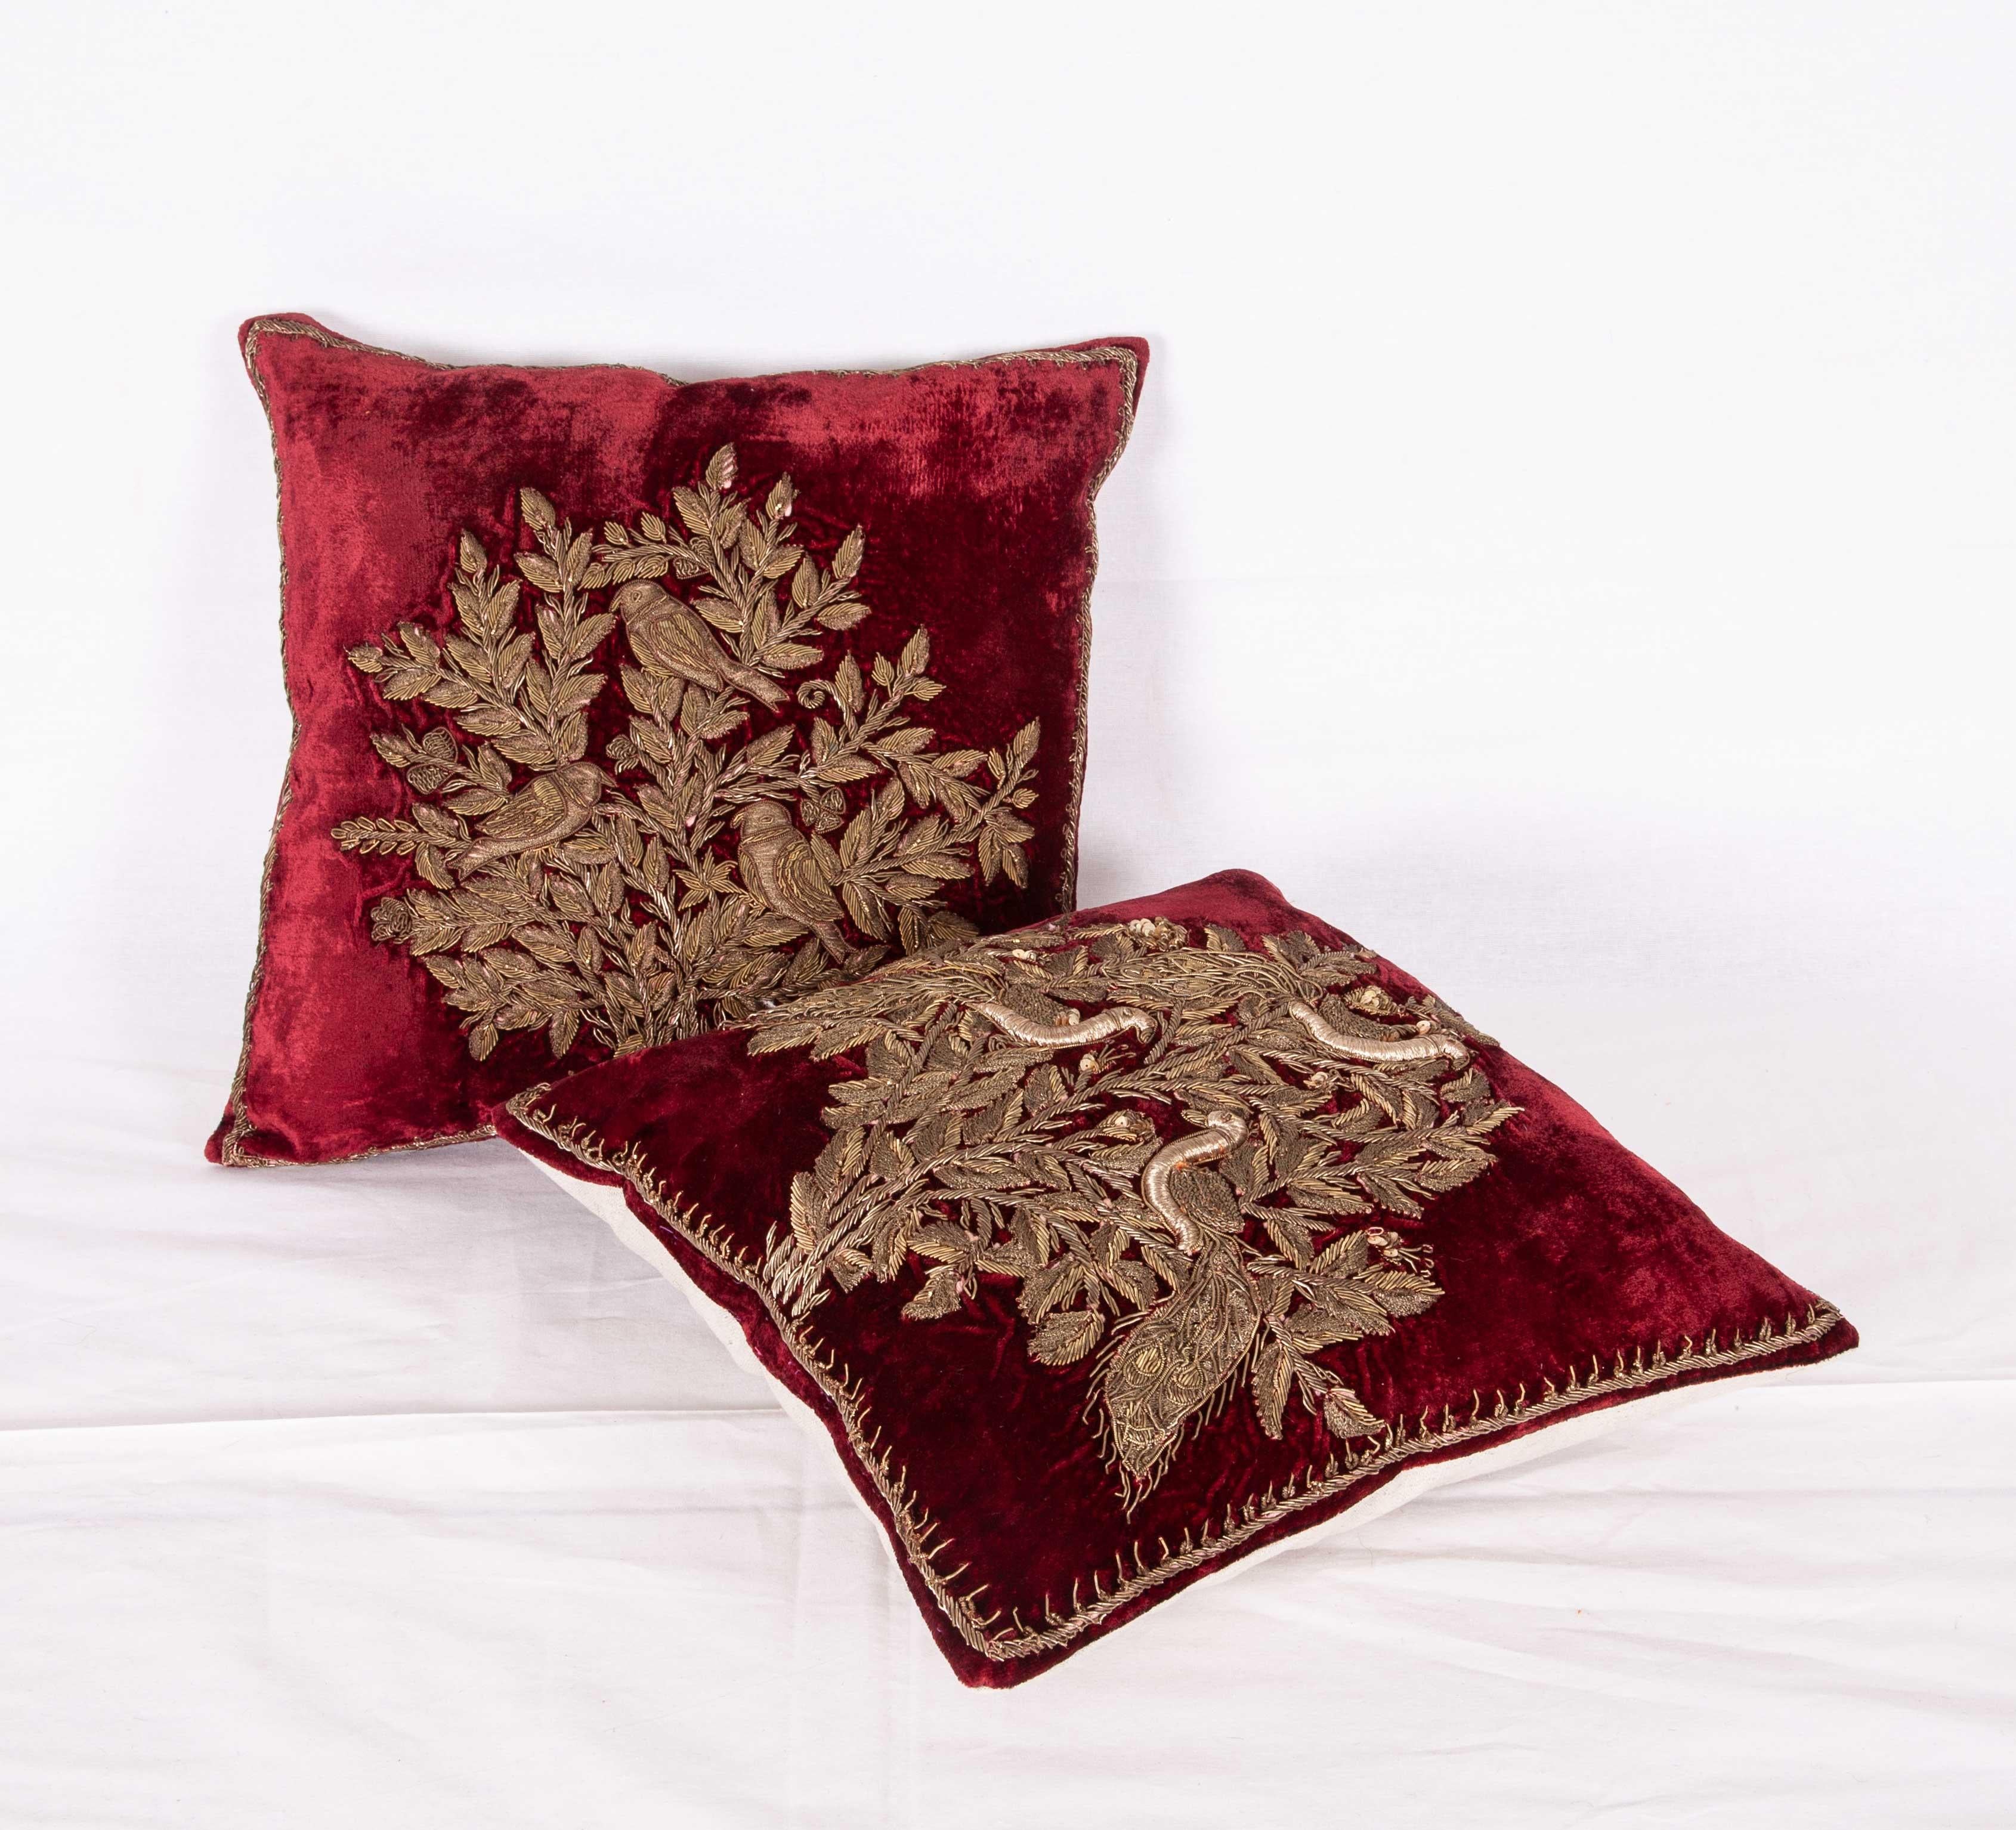 Embroidered Silk Velvet Pillow Cases with Metallic Embroidery from India, Early 20th Century